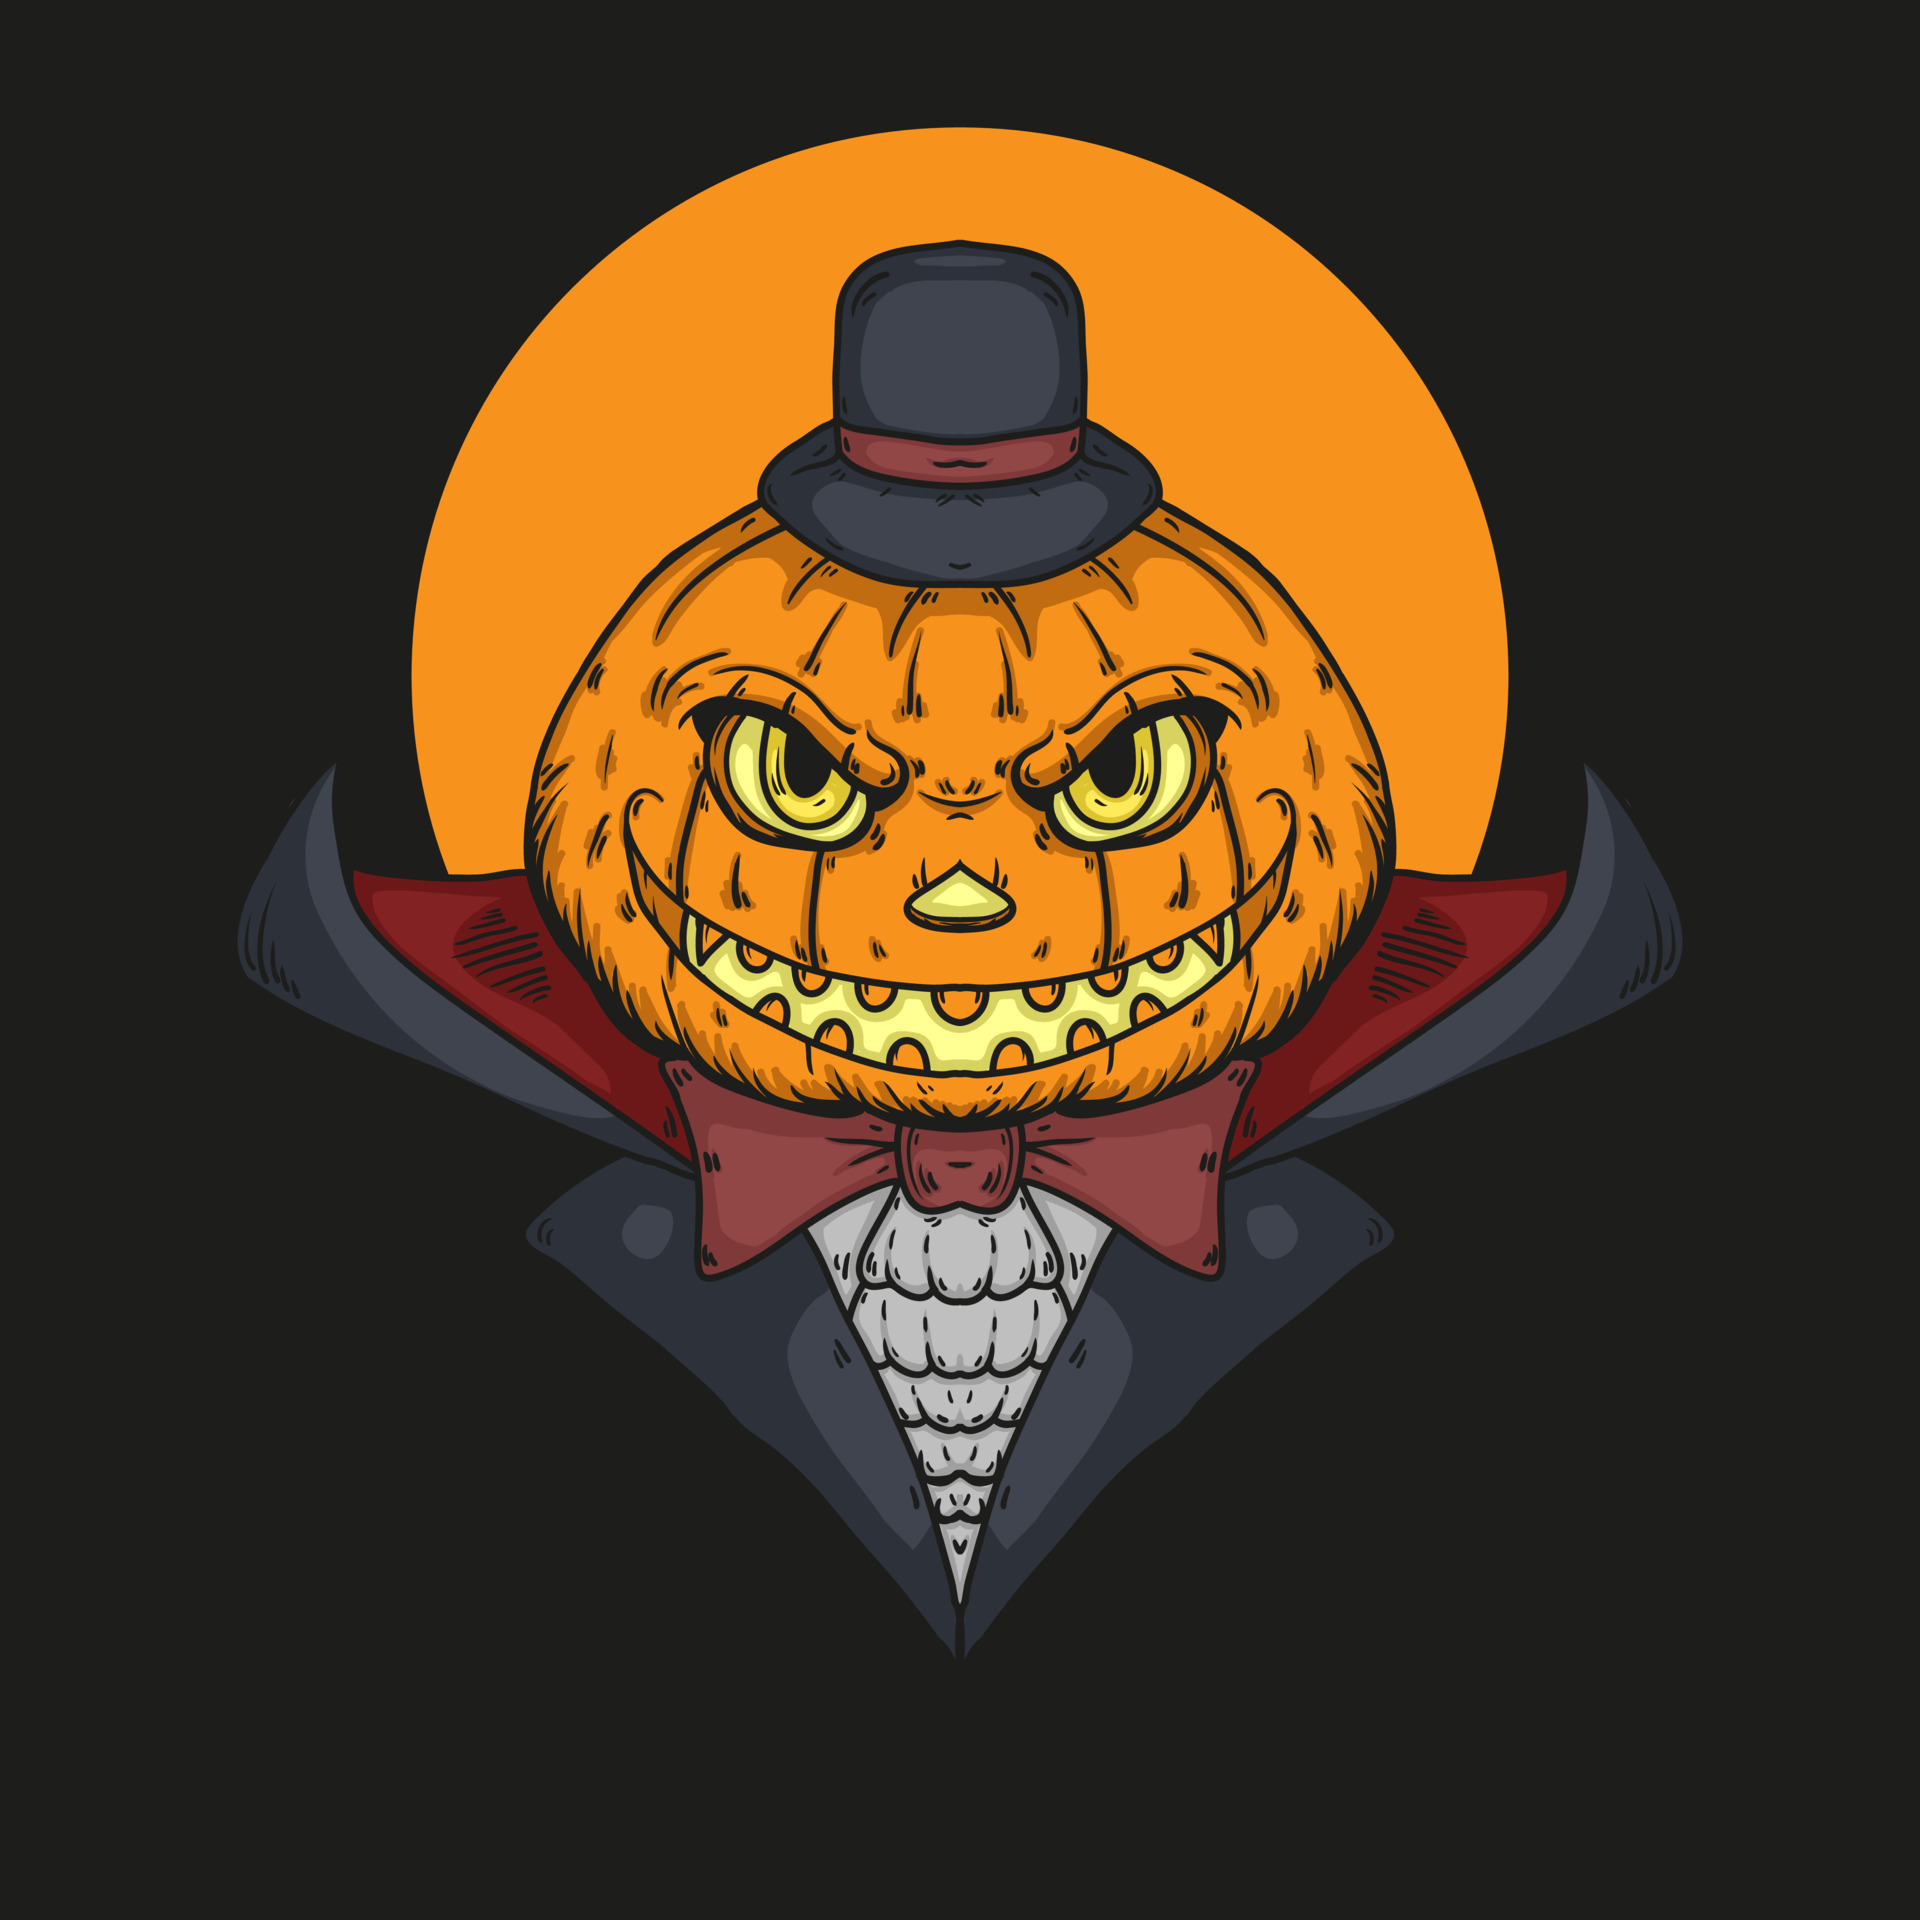 A sinister monster with a pumpkin head stands with two shiny axes in his  hands against